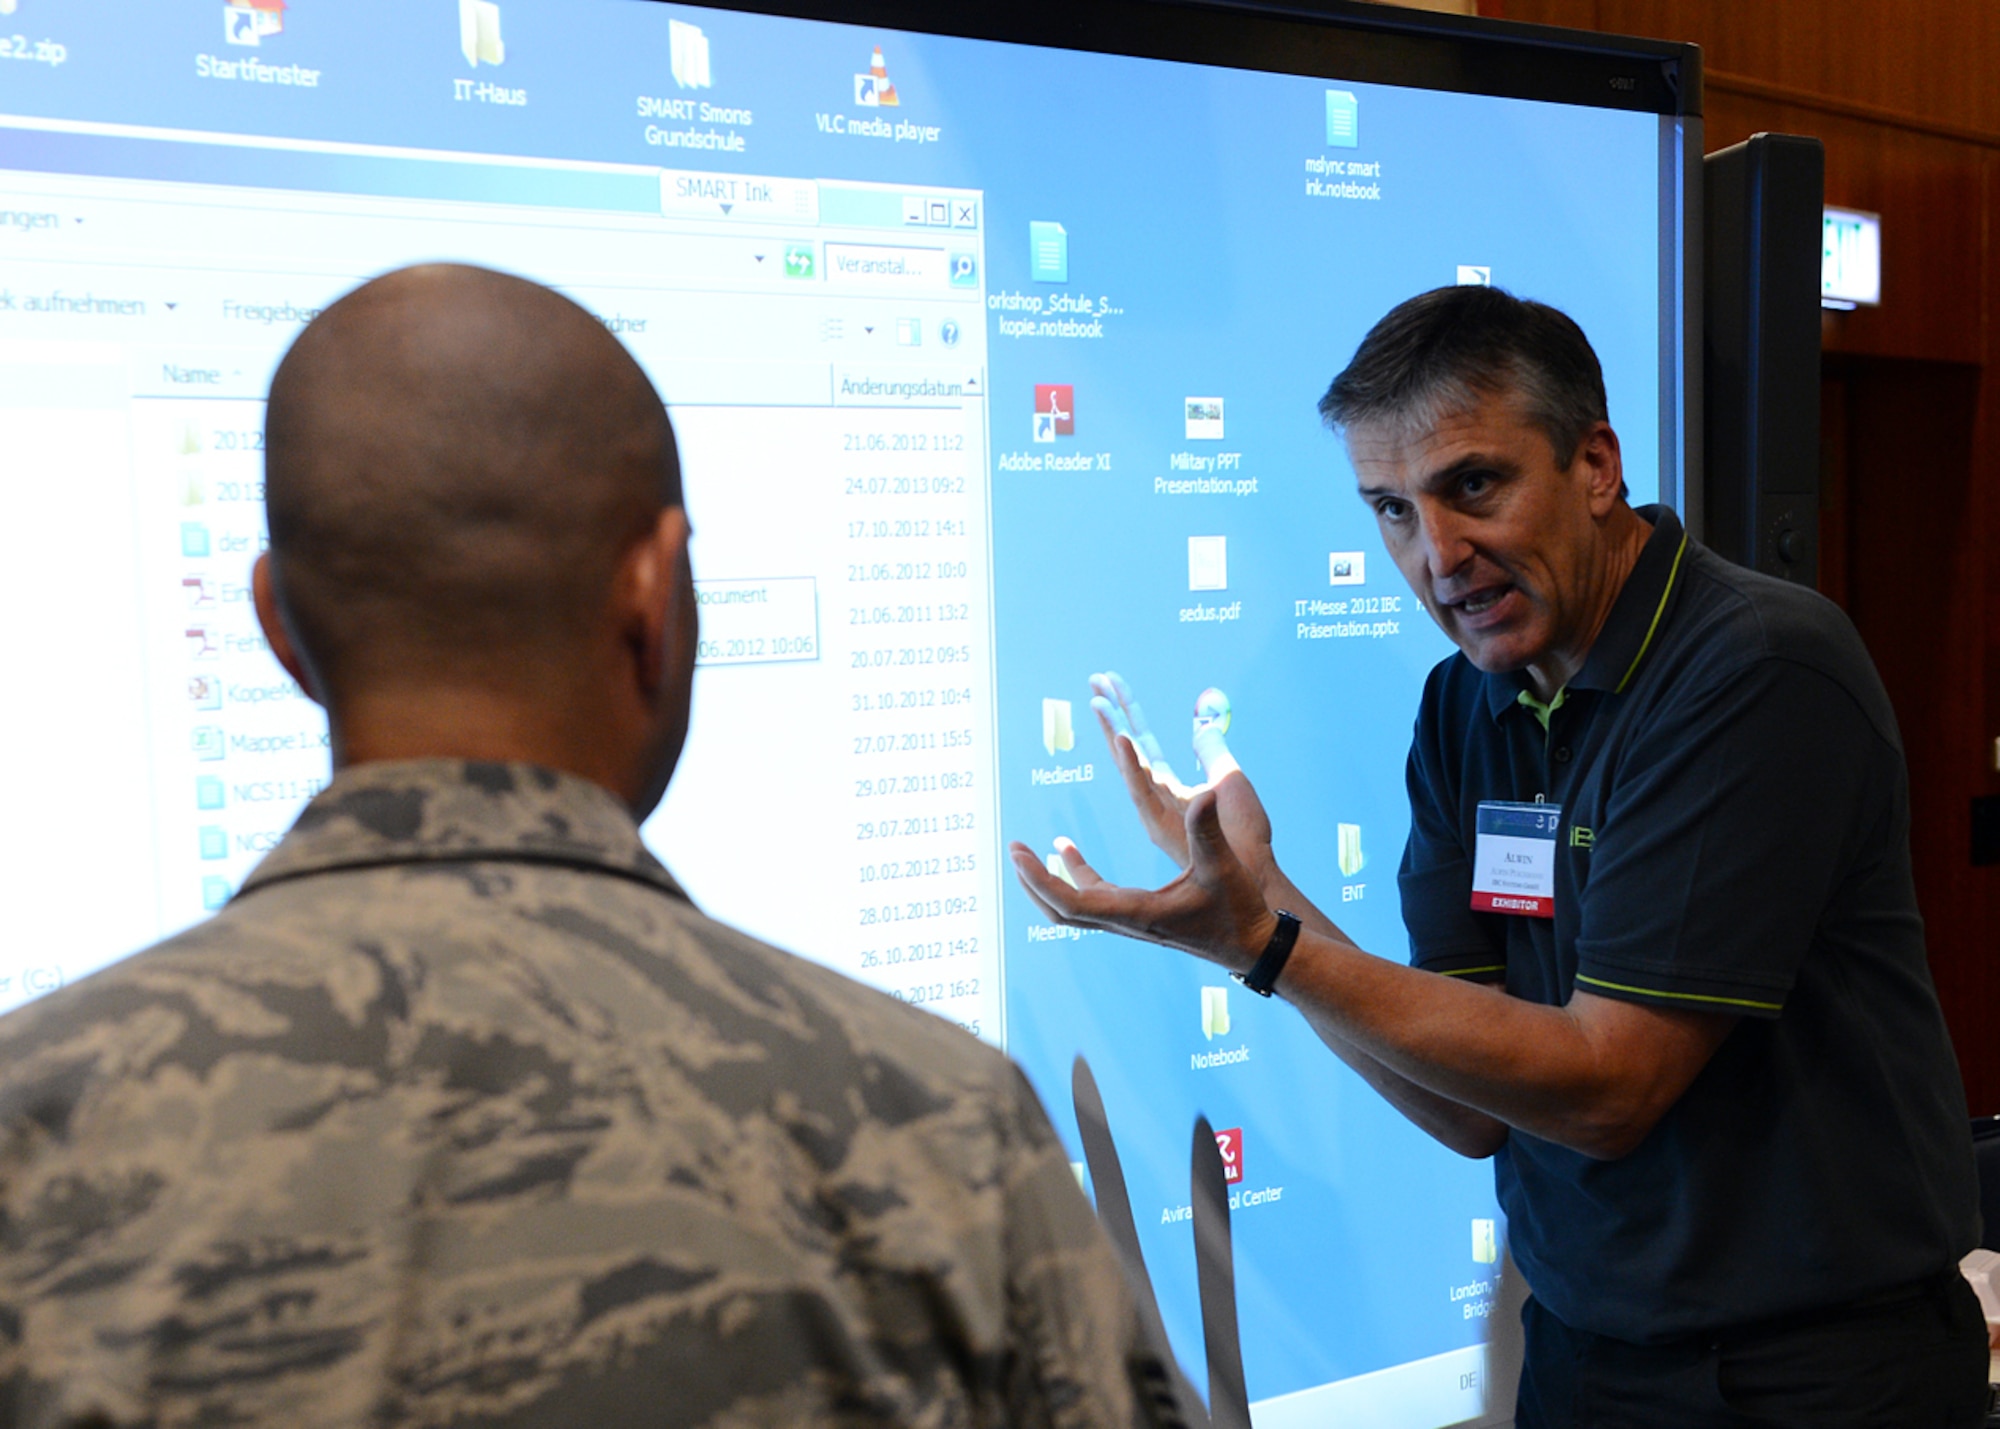 SPANGDAHLEM AIR BASE, Germany -- Alwin Puschmann, IBC Systems in Bitburg, explains how to operate an interactive whiteboard to U.S. Air Force Staff Sgt. Modesto Alcala, American Forces Network, at the 2013 Spangdahlem Technology Expo July 24, 2013. More than 25 exhibitors demonstrated their modern technology to the Spangdahlem community. The interactive whiteboard is intended for office or conference settings and uses multiple interface capabilities. (U.S. Air Force photo by Staff Sgt. Daryl Knee/Released)